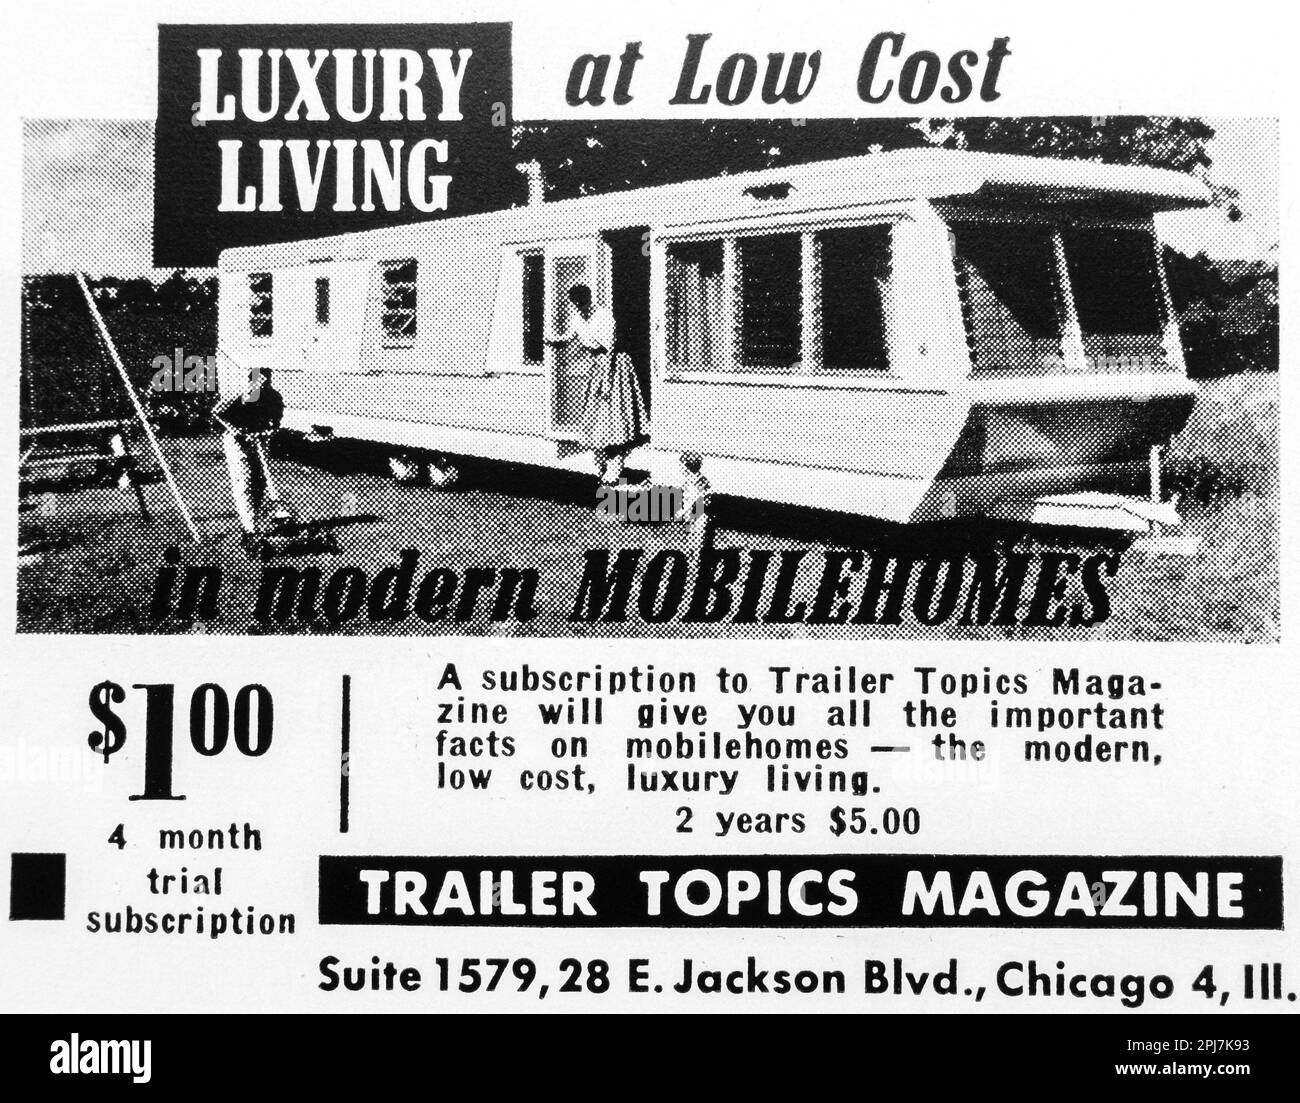 Trailer Topics Magazine subscription trial for $1 - Luxury living in mobile homes advert in a NatGeo magazine, novembre 1959 Foto Stock